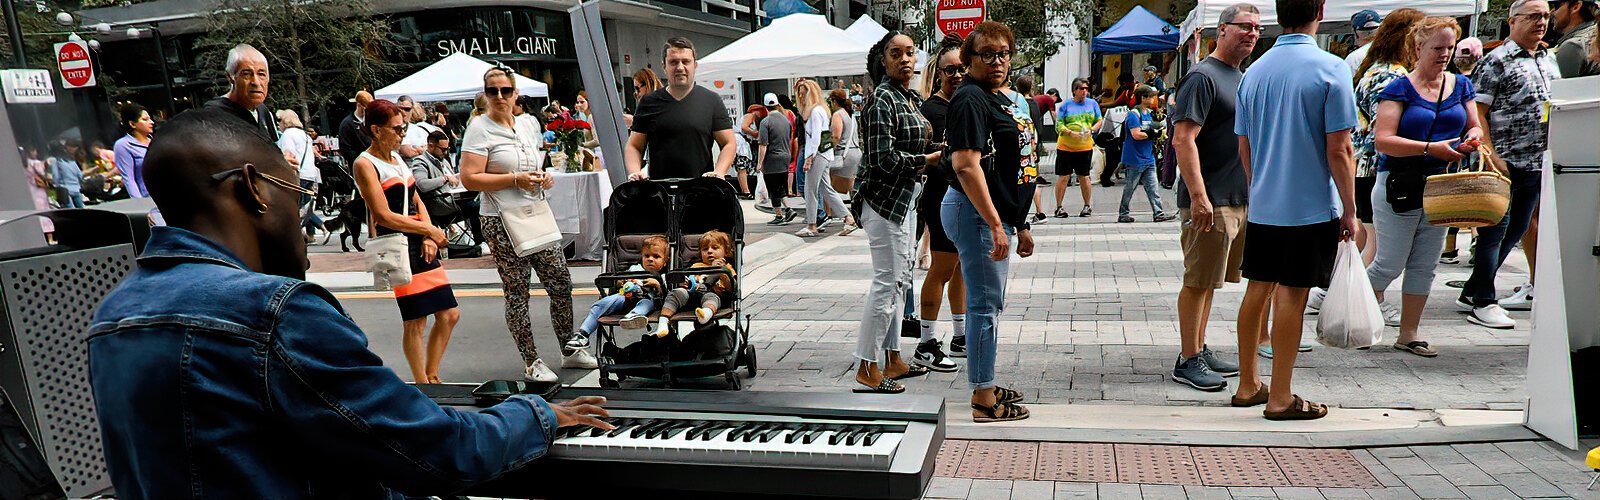 Musician Caleb Lattimore provides live music on piano during The Market at Water Street Tampa.